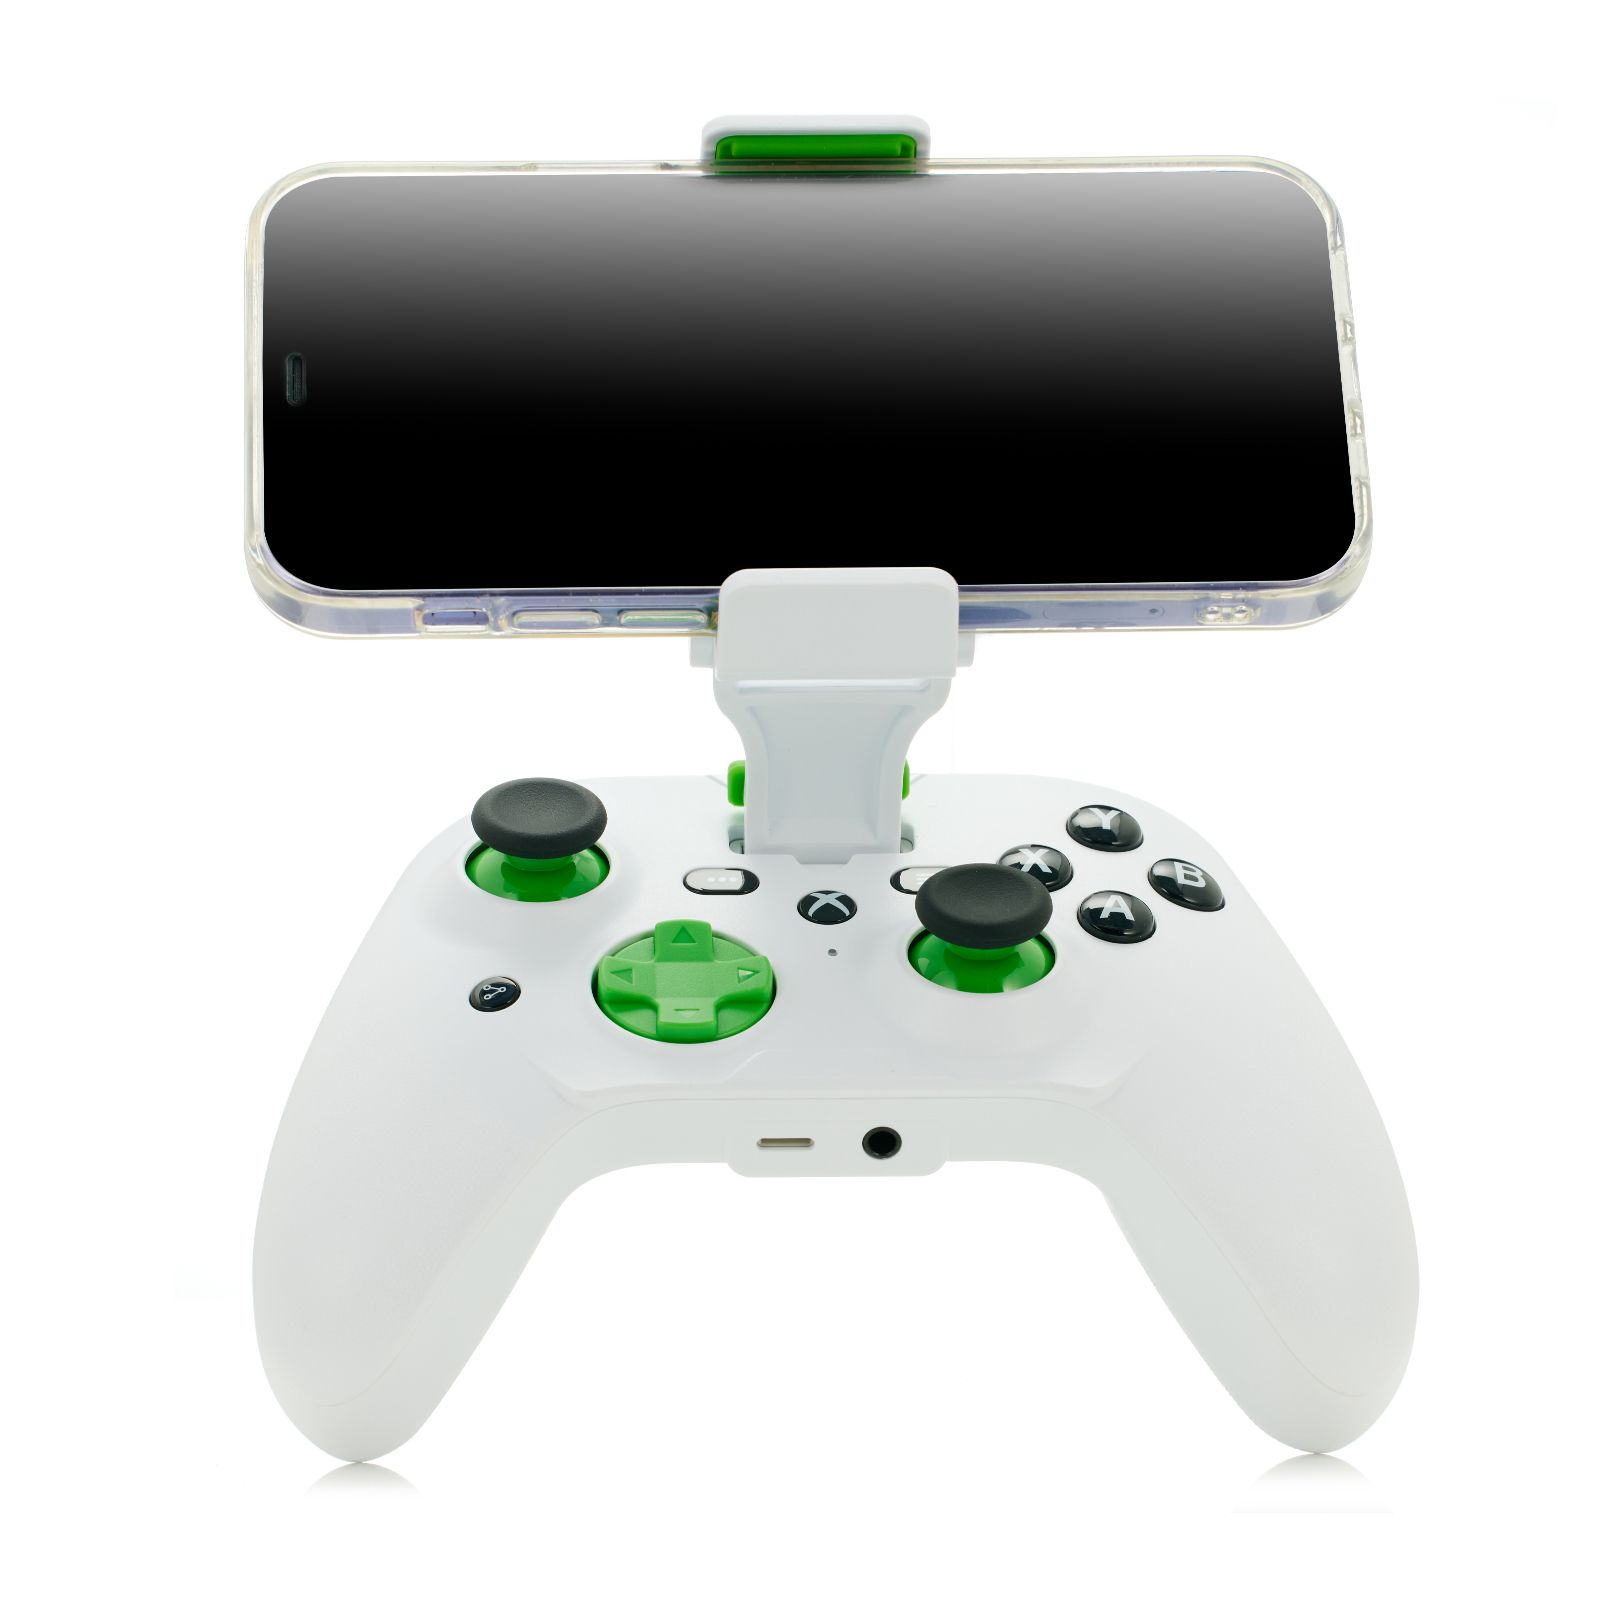 RiotPWR™ Cloud Gaming Controller for iOS (Xbox Edition)